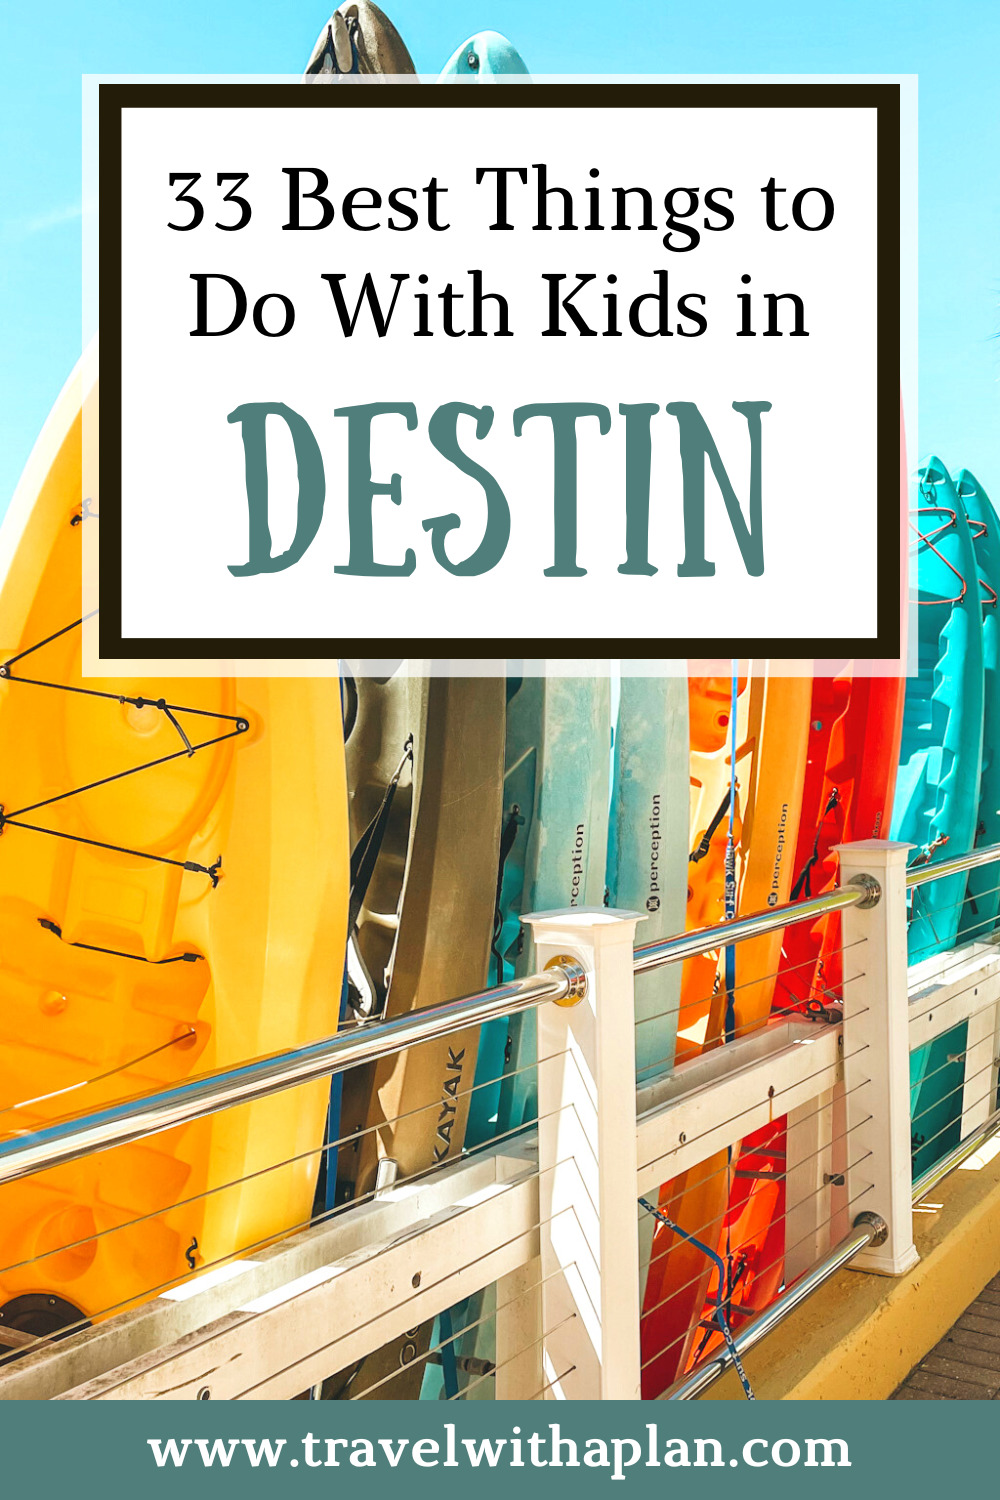 Check out our list of fun things to do in Destin with kids while on vacation!  This Florida vacation is packed with fun things to do both outdoors, and indoors when it's raining or cold.  Start planning your Destin family vacation here!  #familytravel #Florida #Destin